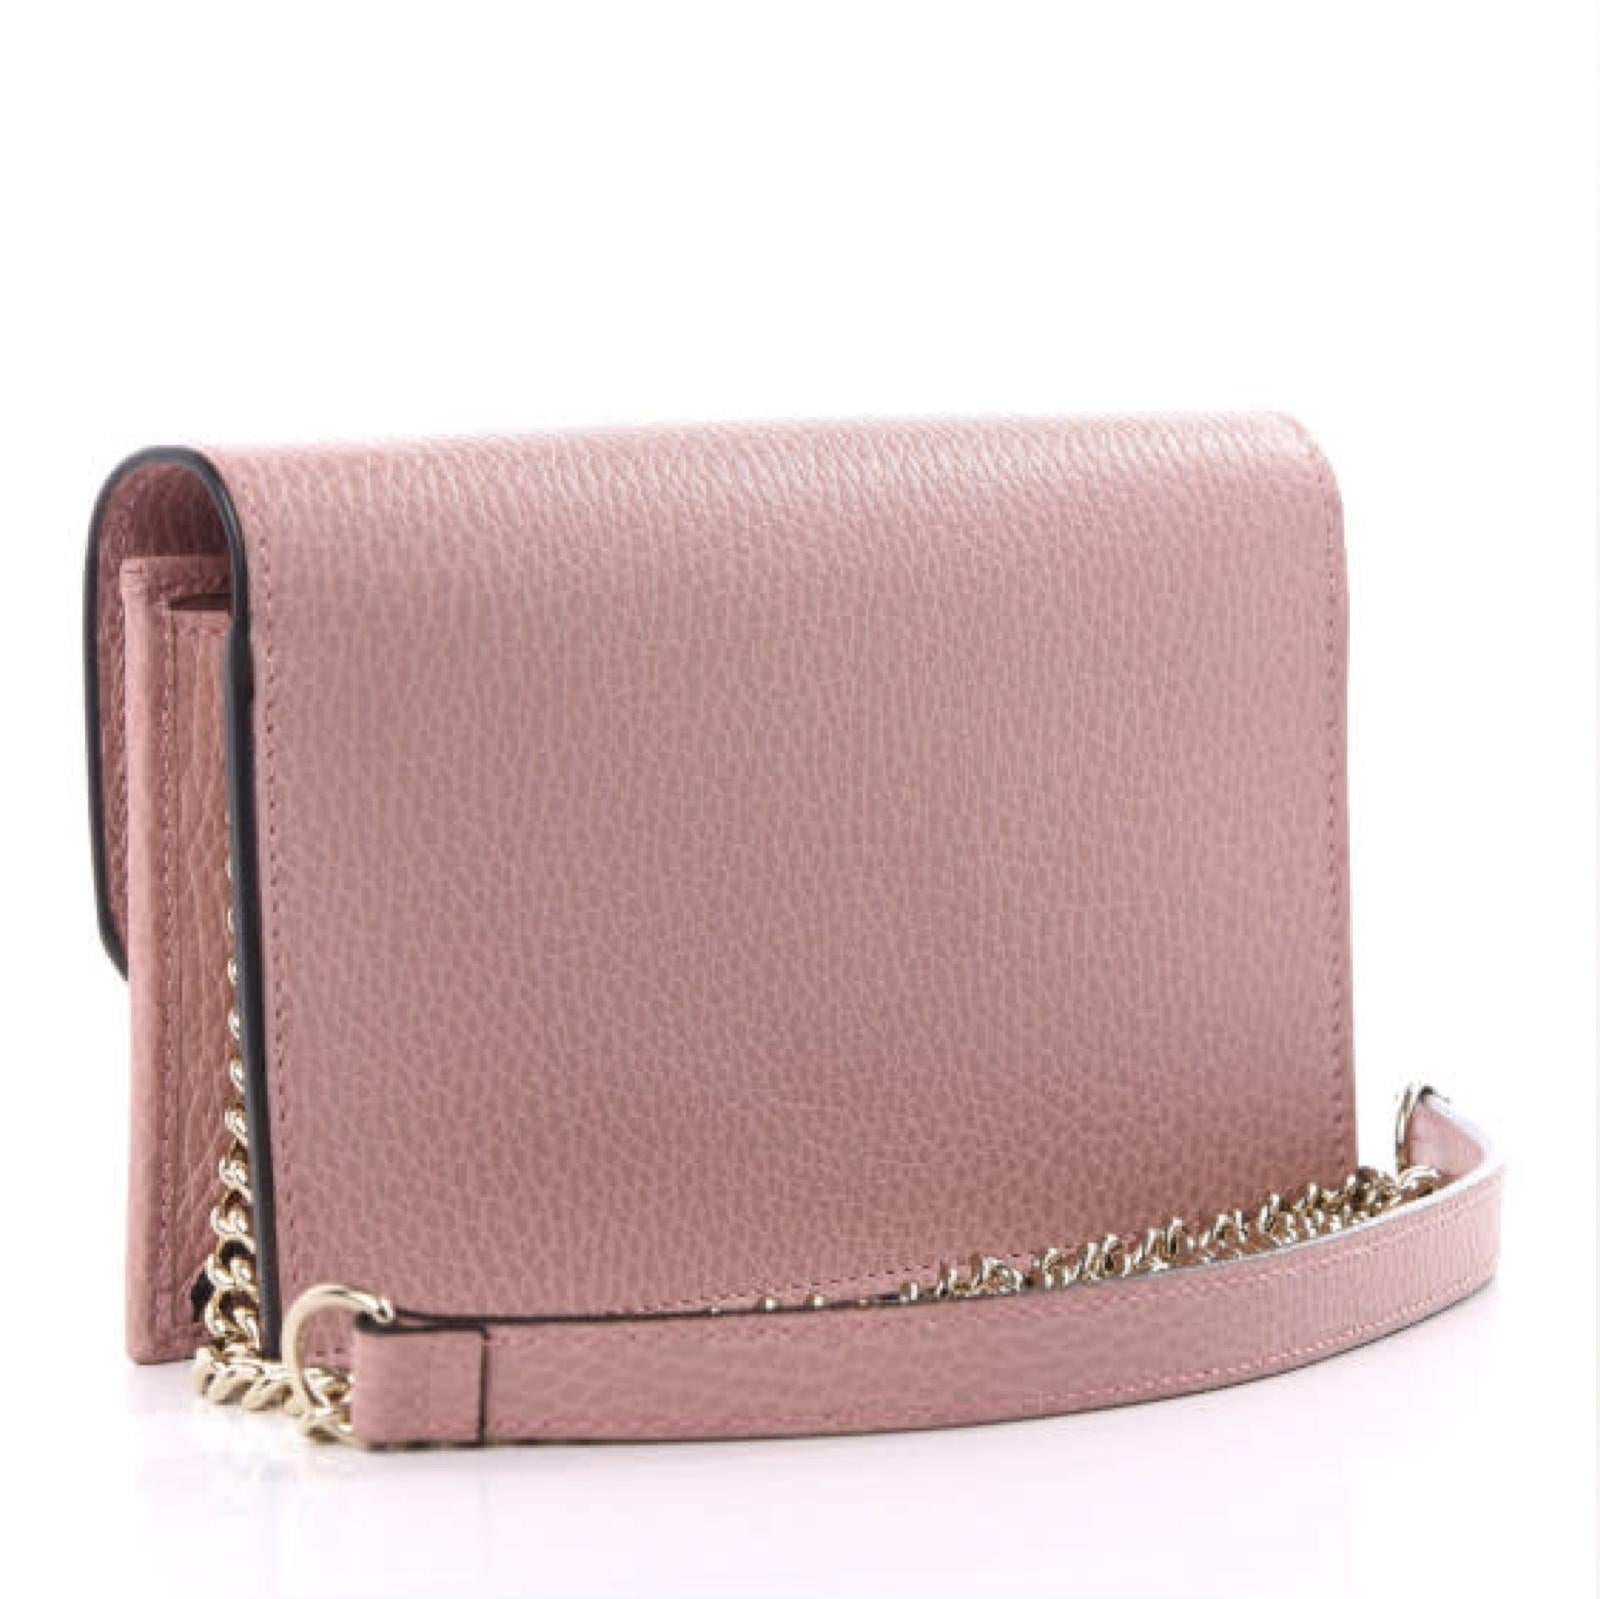 This shoulder bag is made of textured calfskin leather in a dusty pink. This bag features a long aged gold chain shoulder strap and a Gucci GG logo on the front flap. The flap opens to a partitioned leather and black fabric interior with card slot